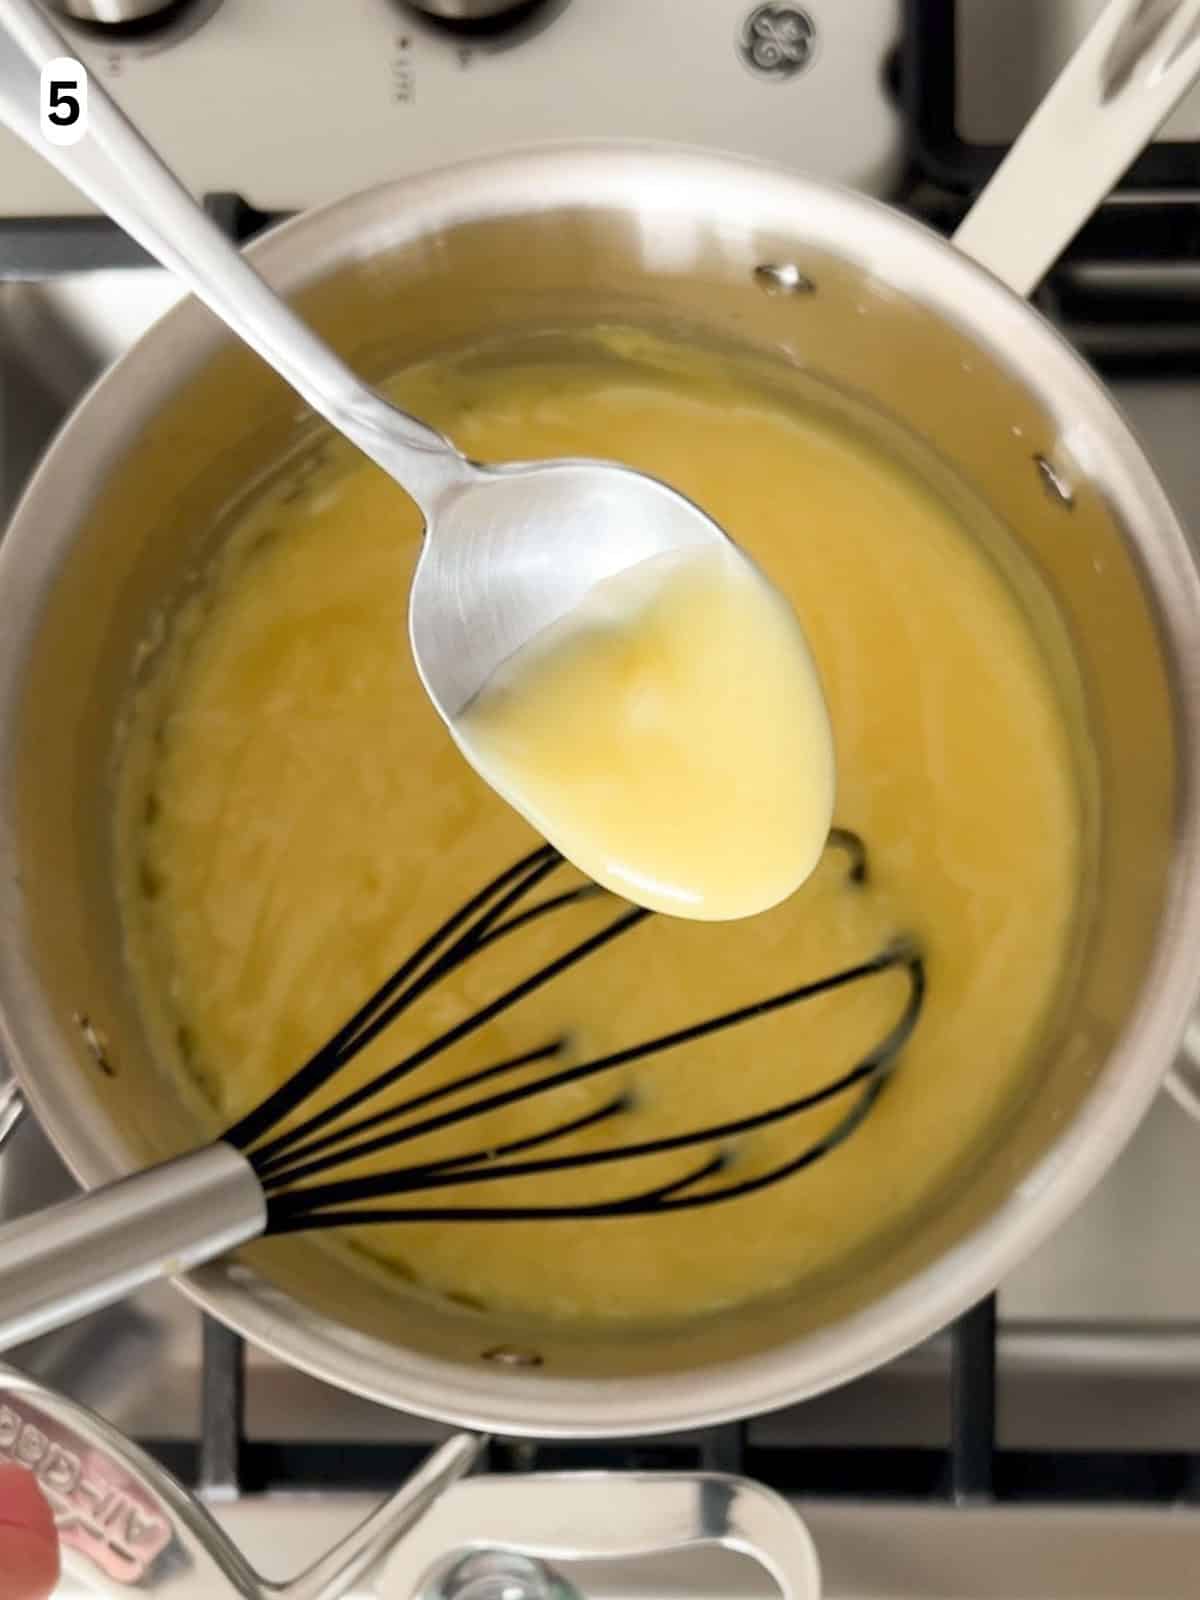 The cornstarch slurry is added and cooked until it reaches a thick pudding.